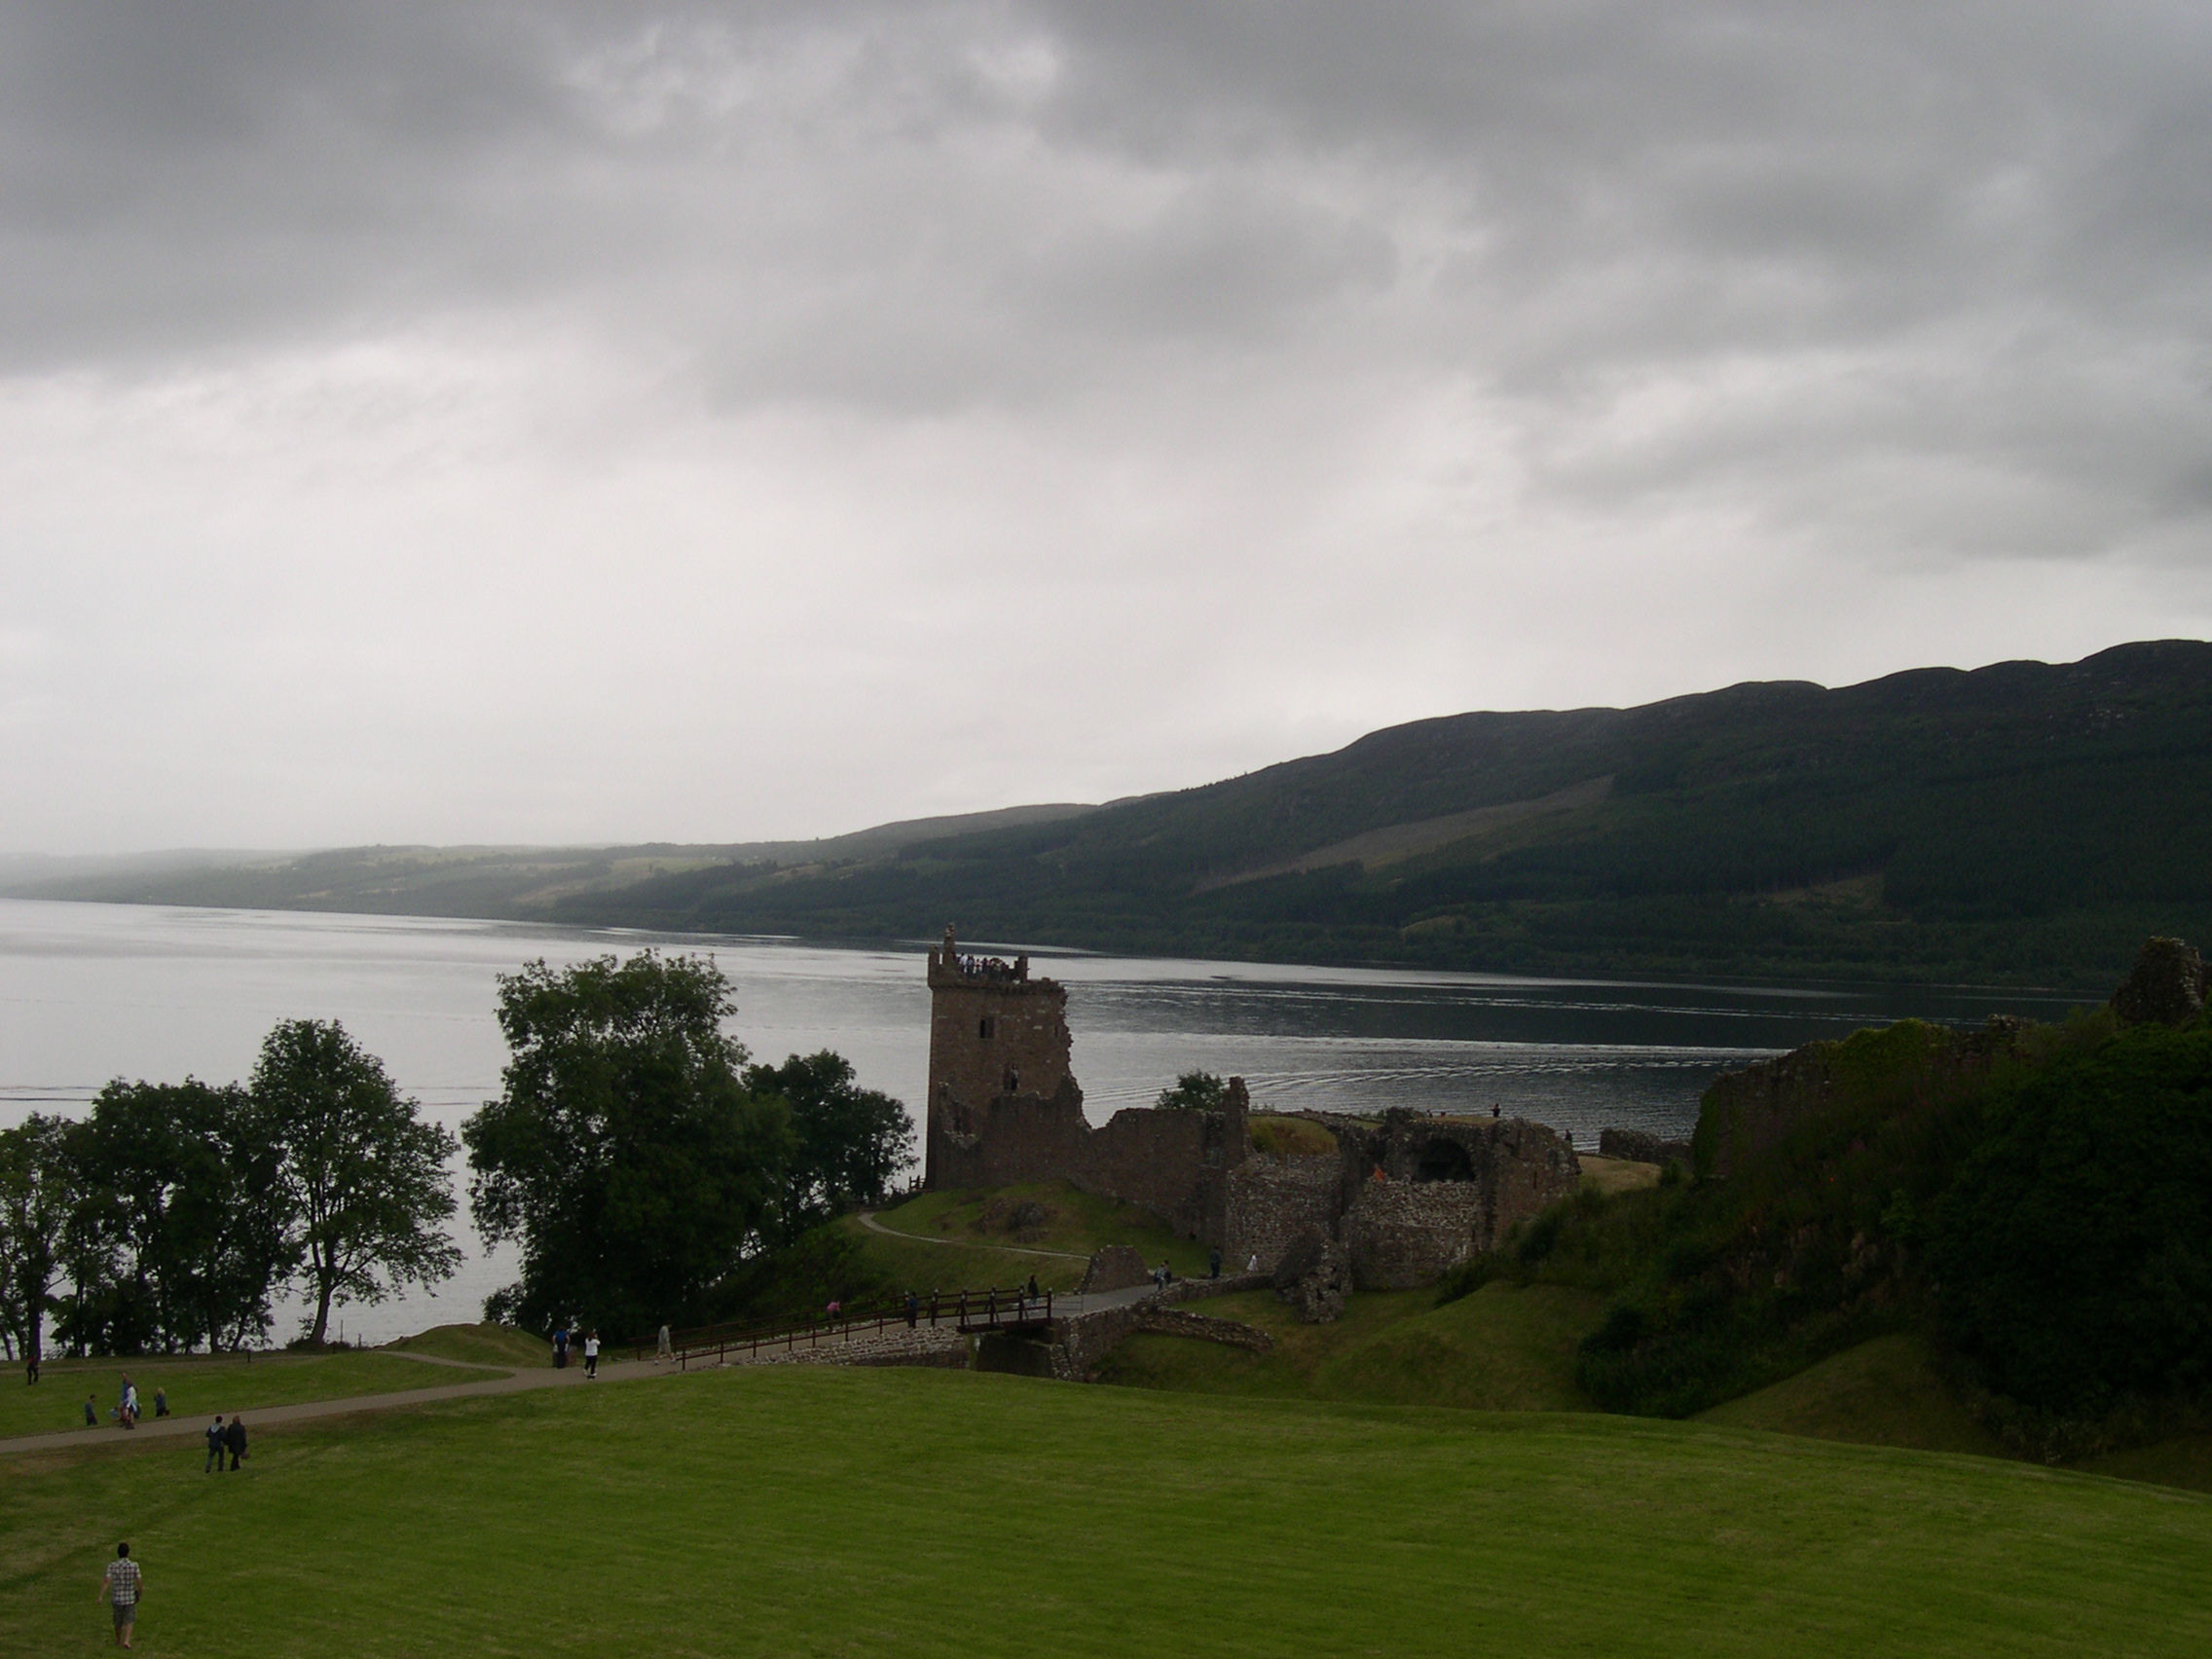 Loch Ness and Castle Urquhart